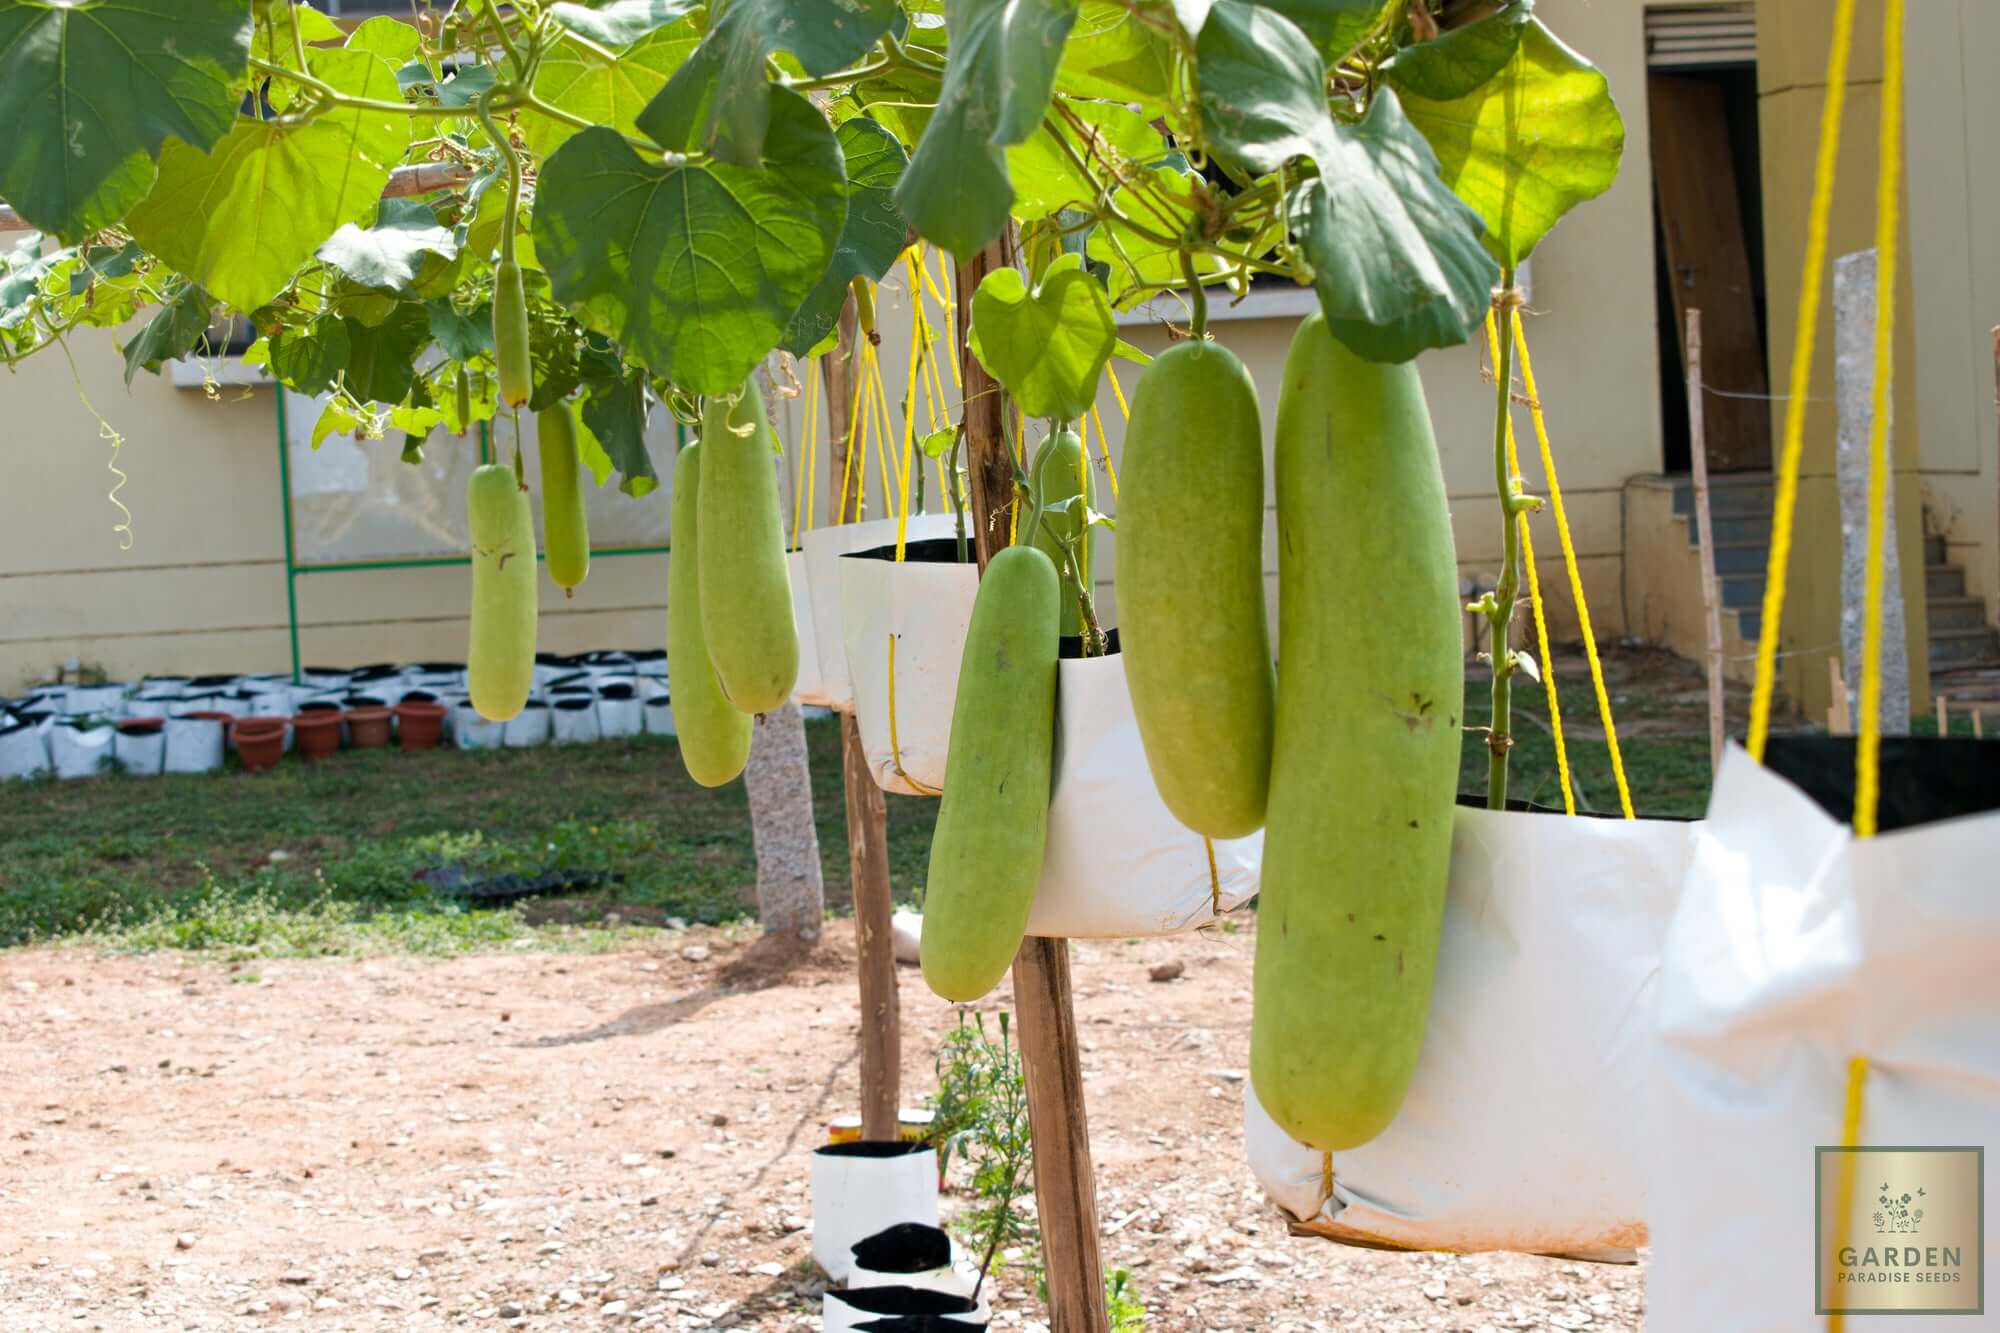 Garden of Refreshment: Buy Bottle Gourd for a Cooling and Nutritious Garden Staple